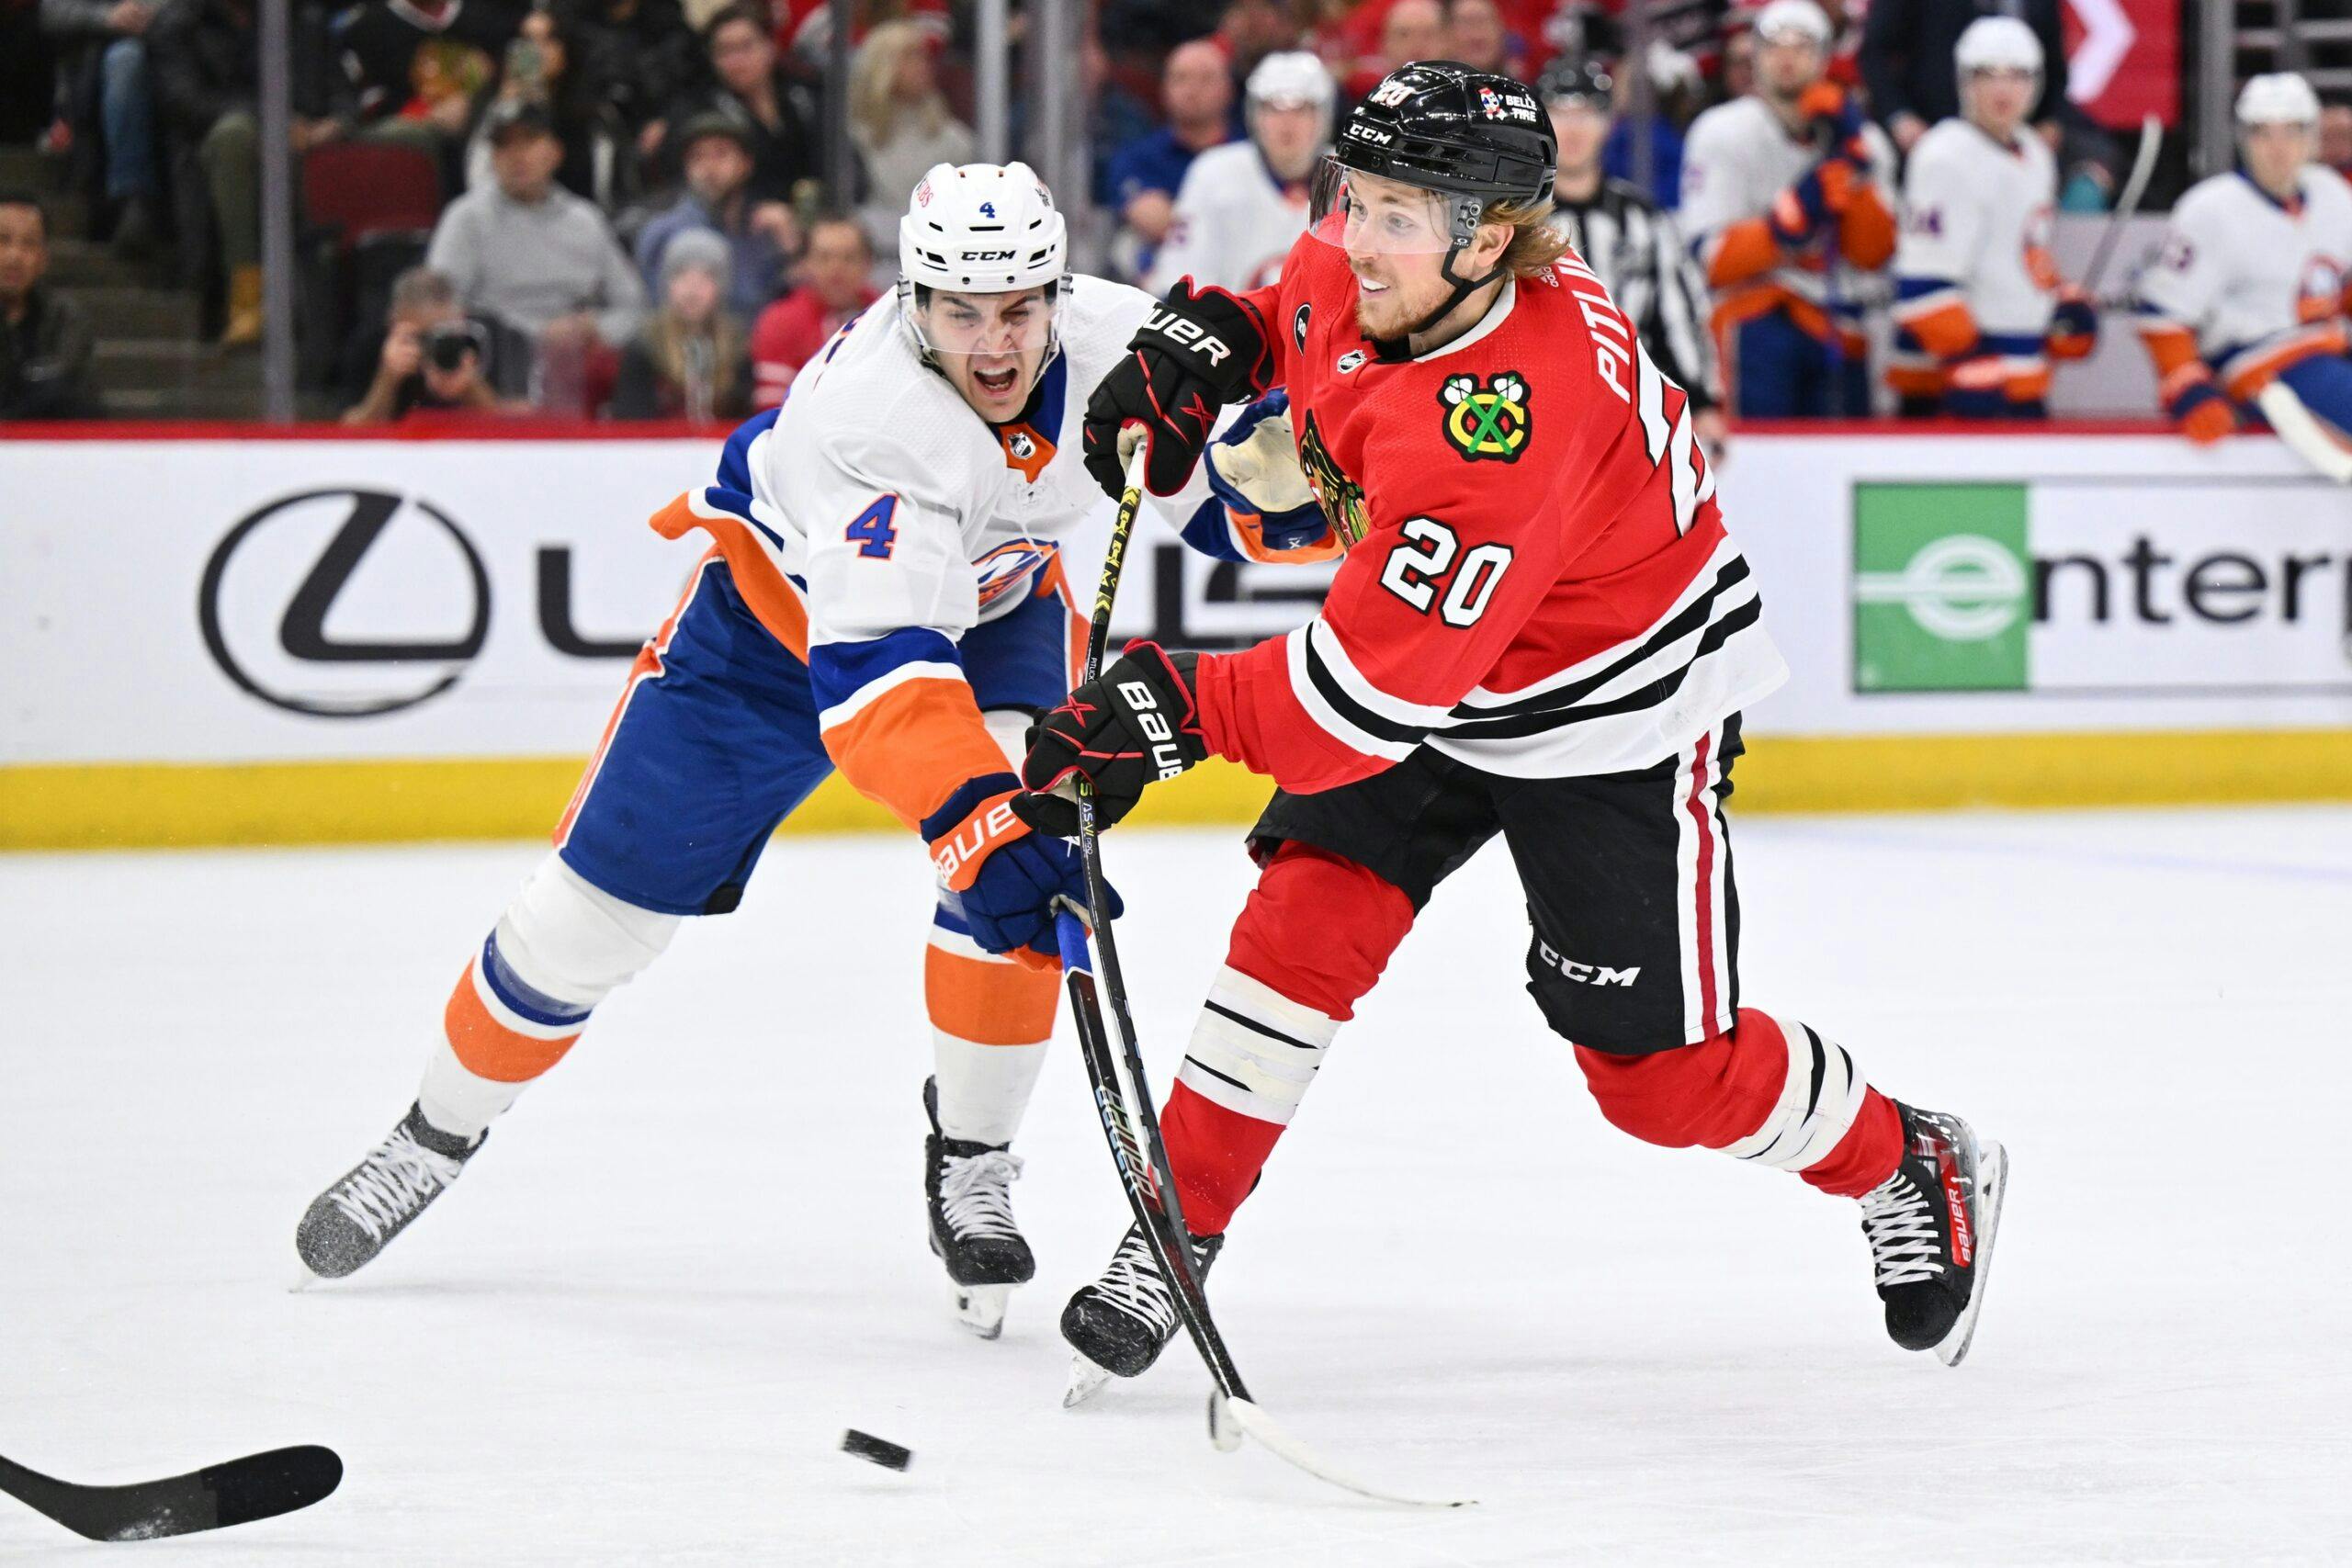 Chicago Blackhawks place forward Rem Pitlick on waivers